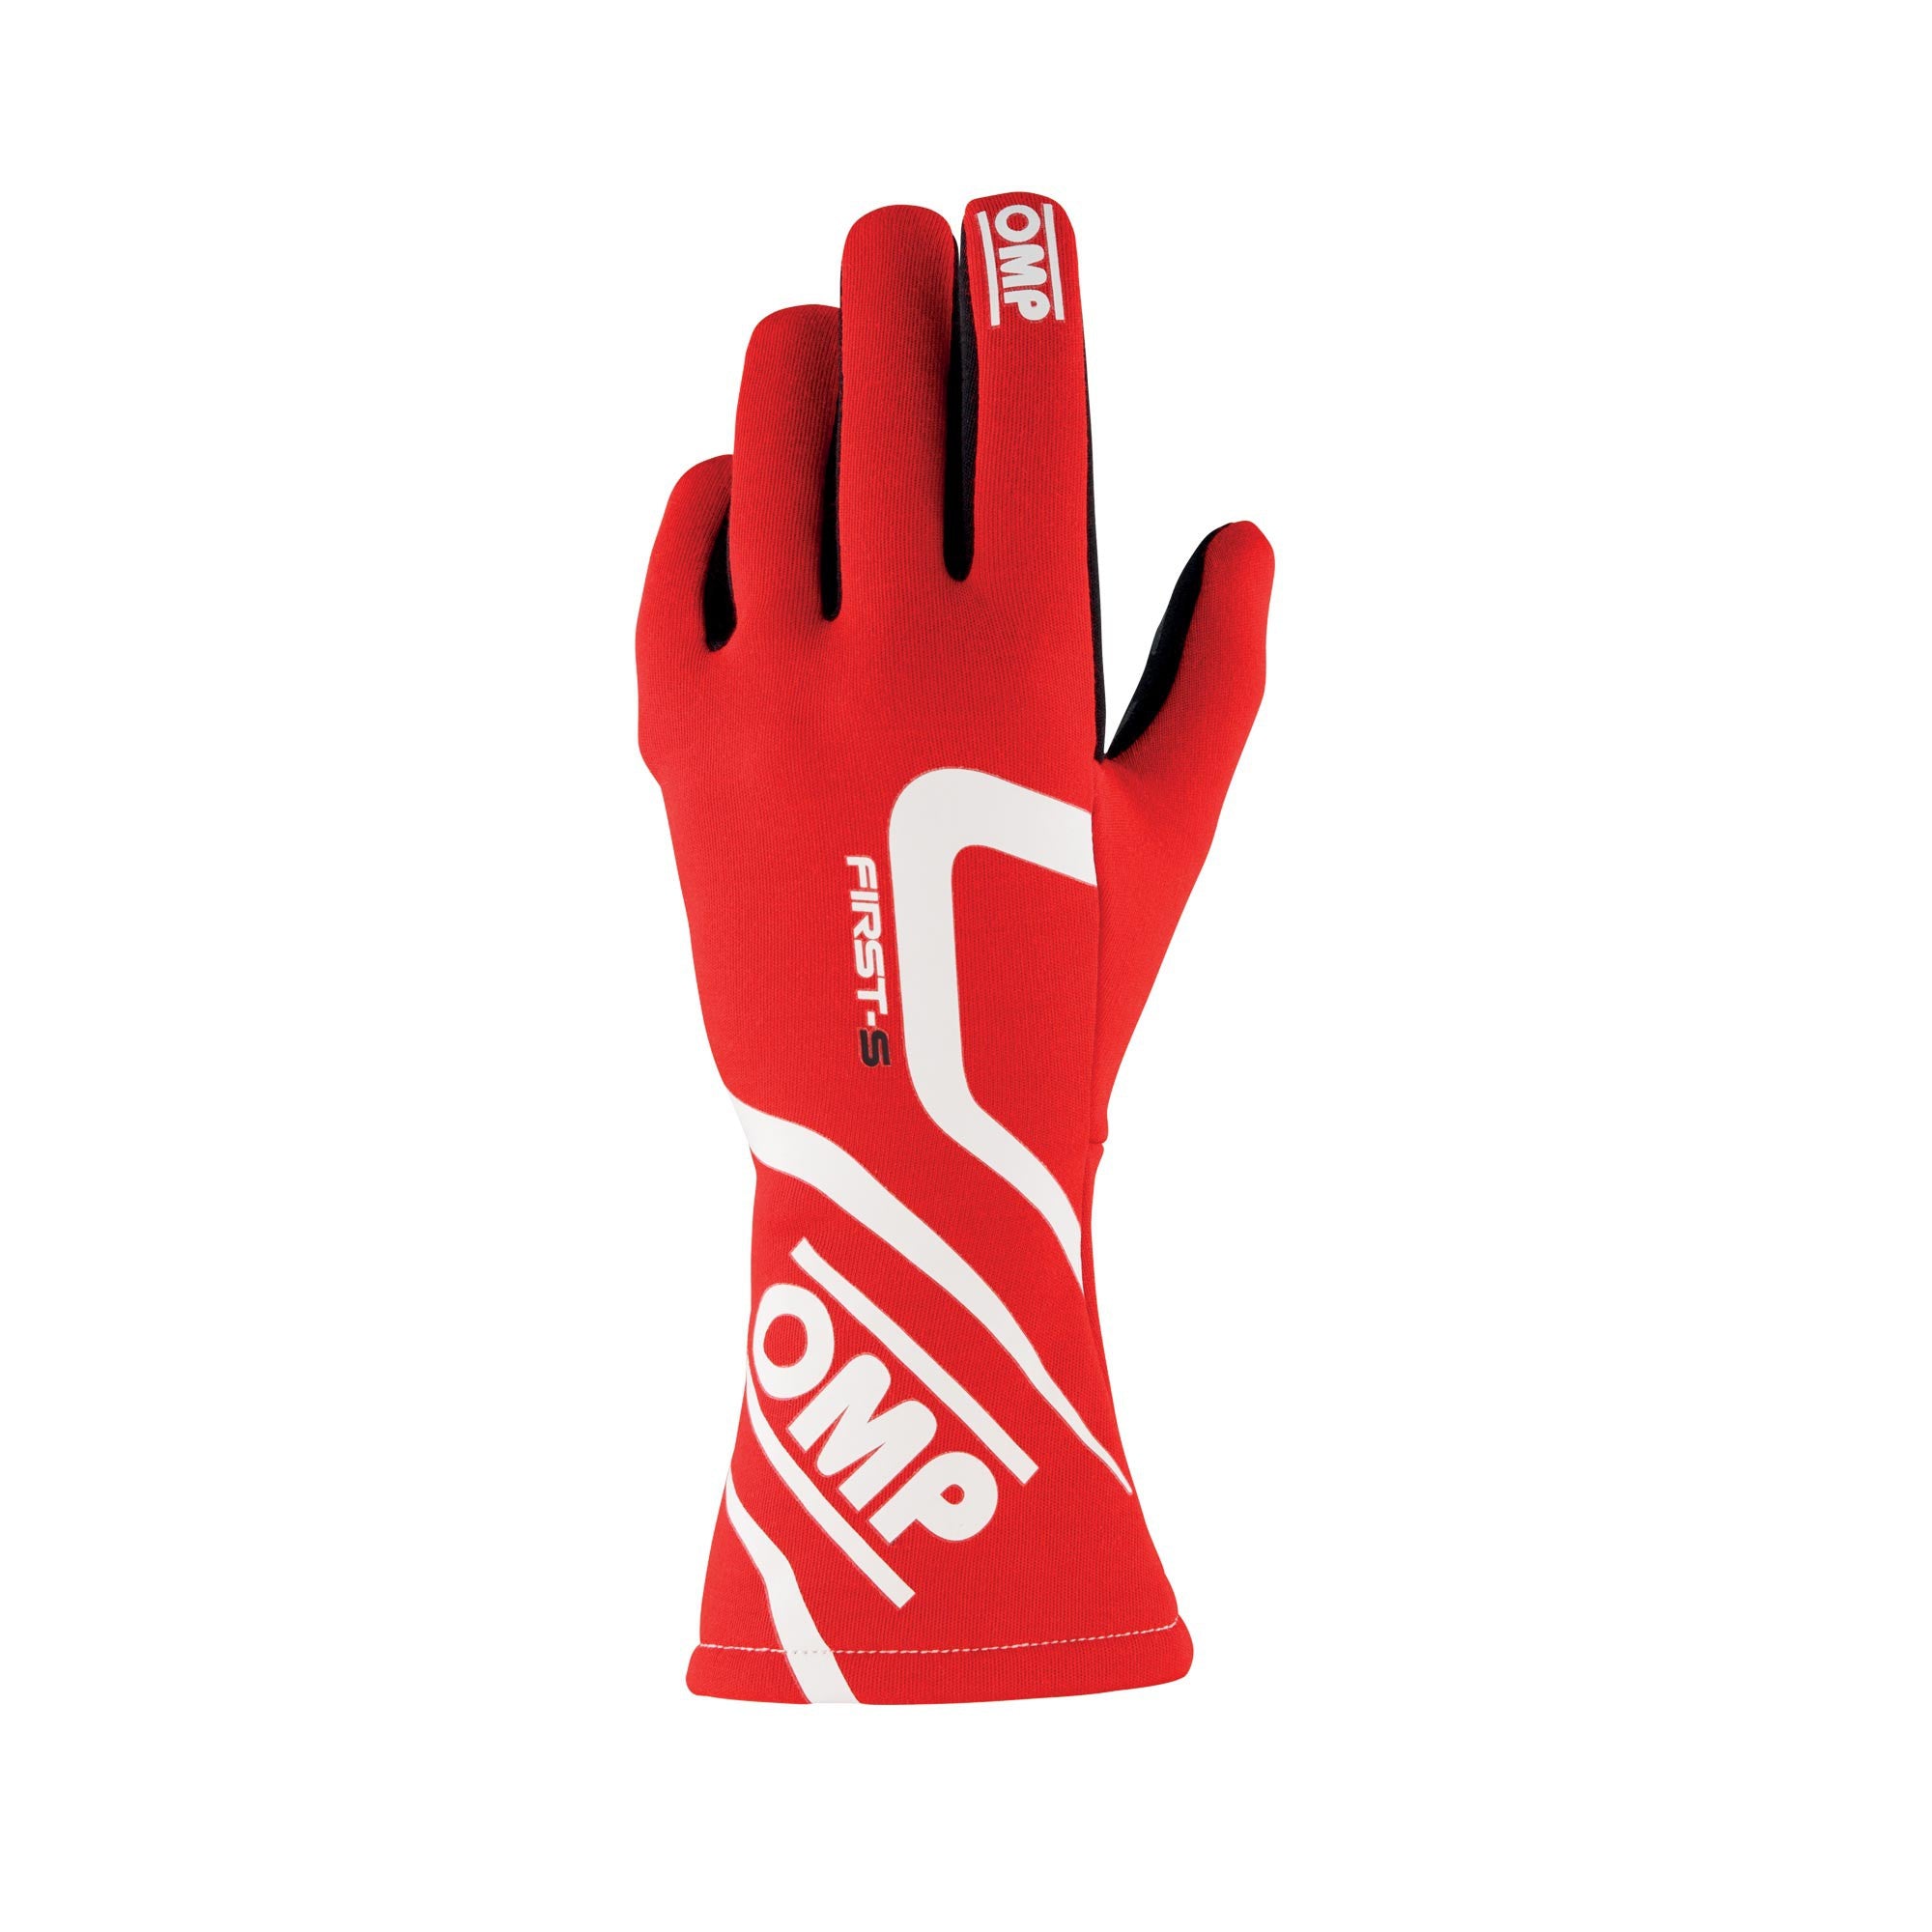 OMP NOMEX RACING GLOVES FIRST-S - Racing Safety Equipment Supplier - Paragon Competition Toronto